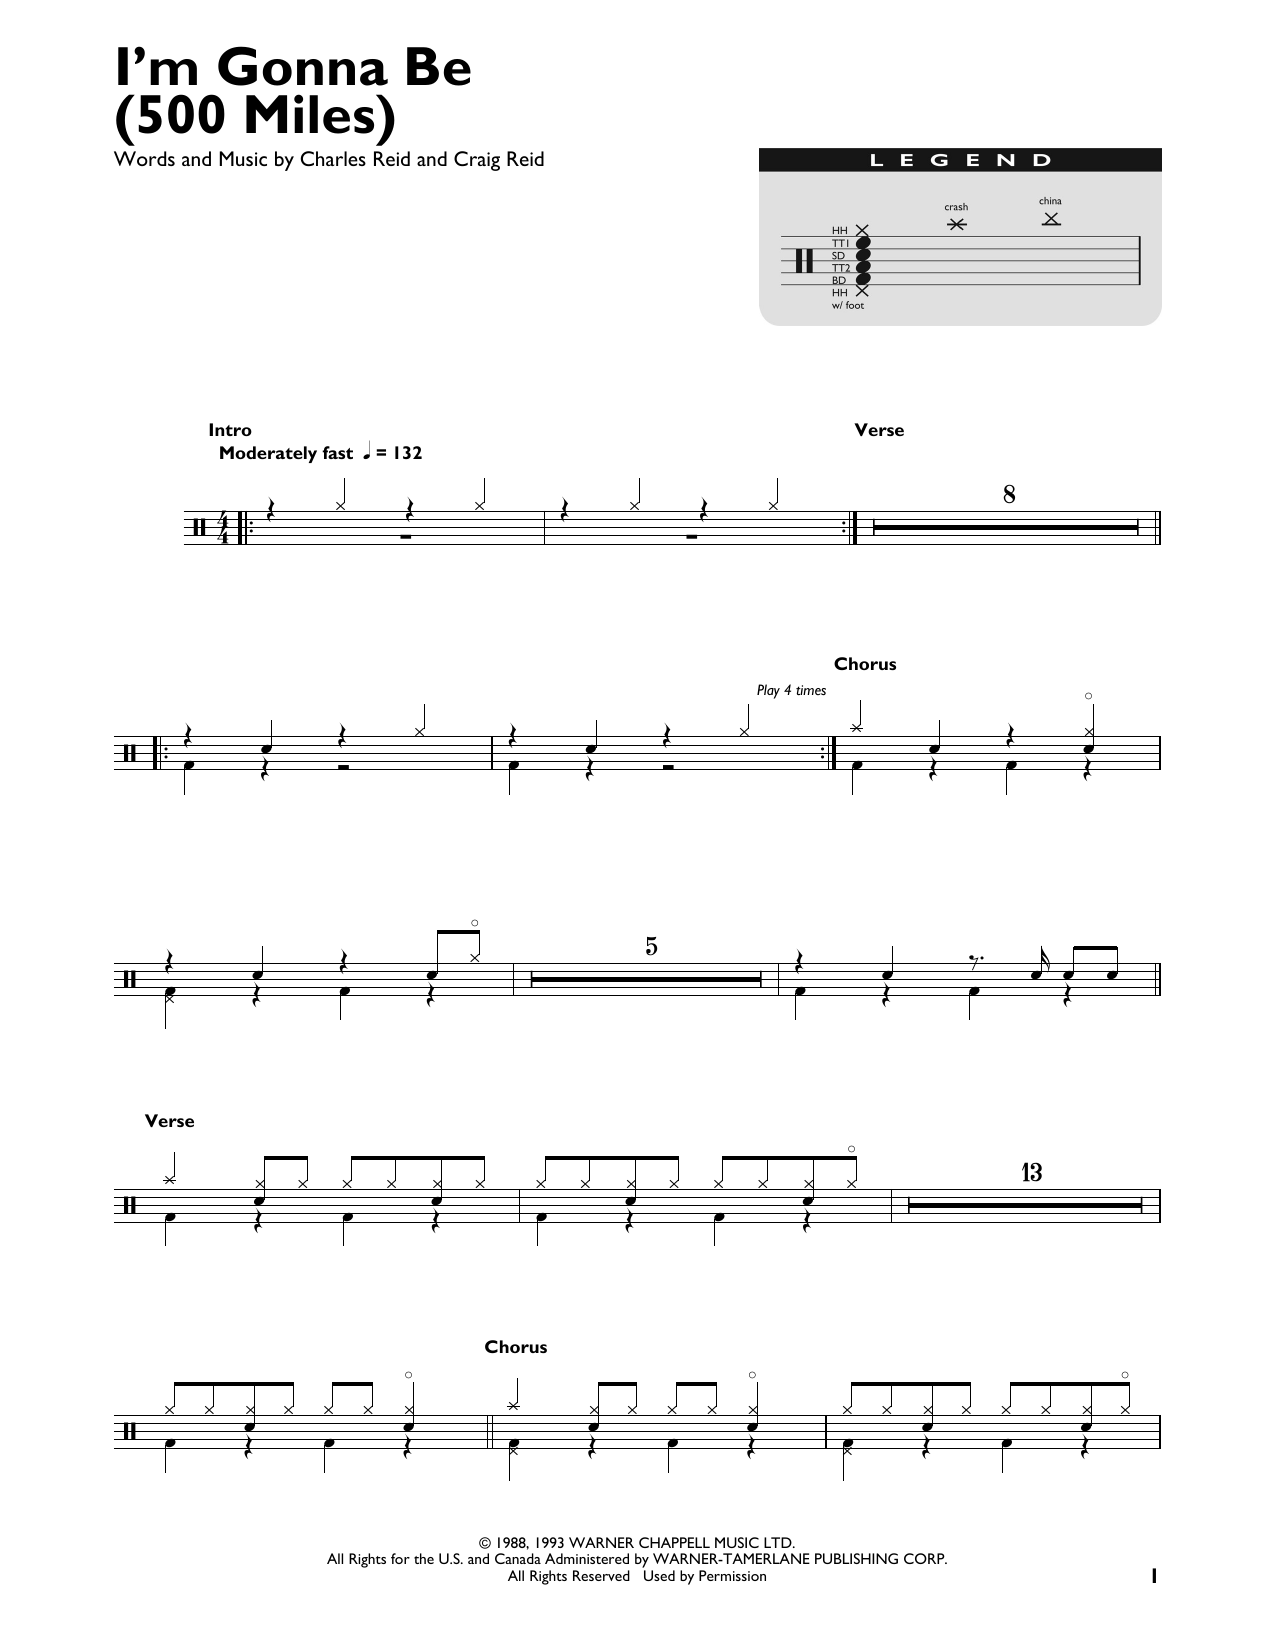 Download The Proclaimers I'm Gonna Be (500 Miles) Sheet Music